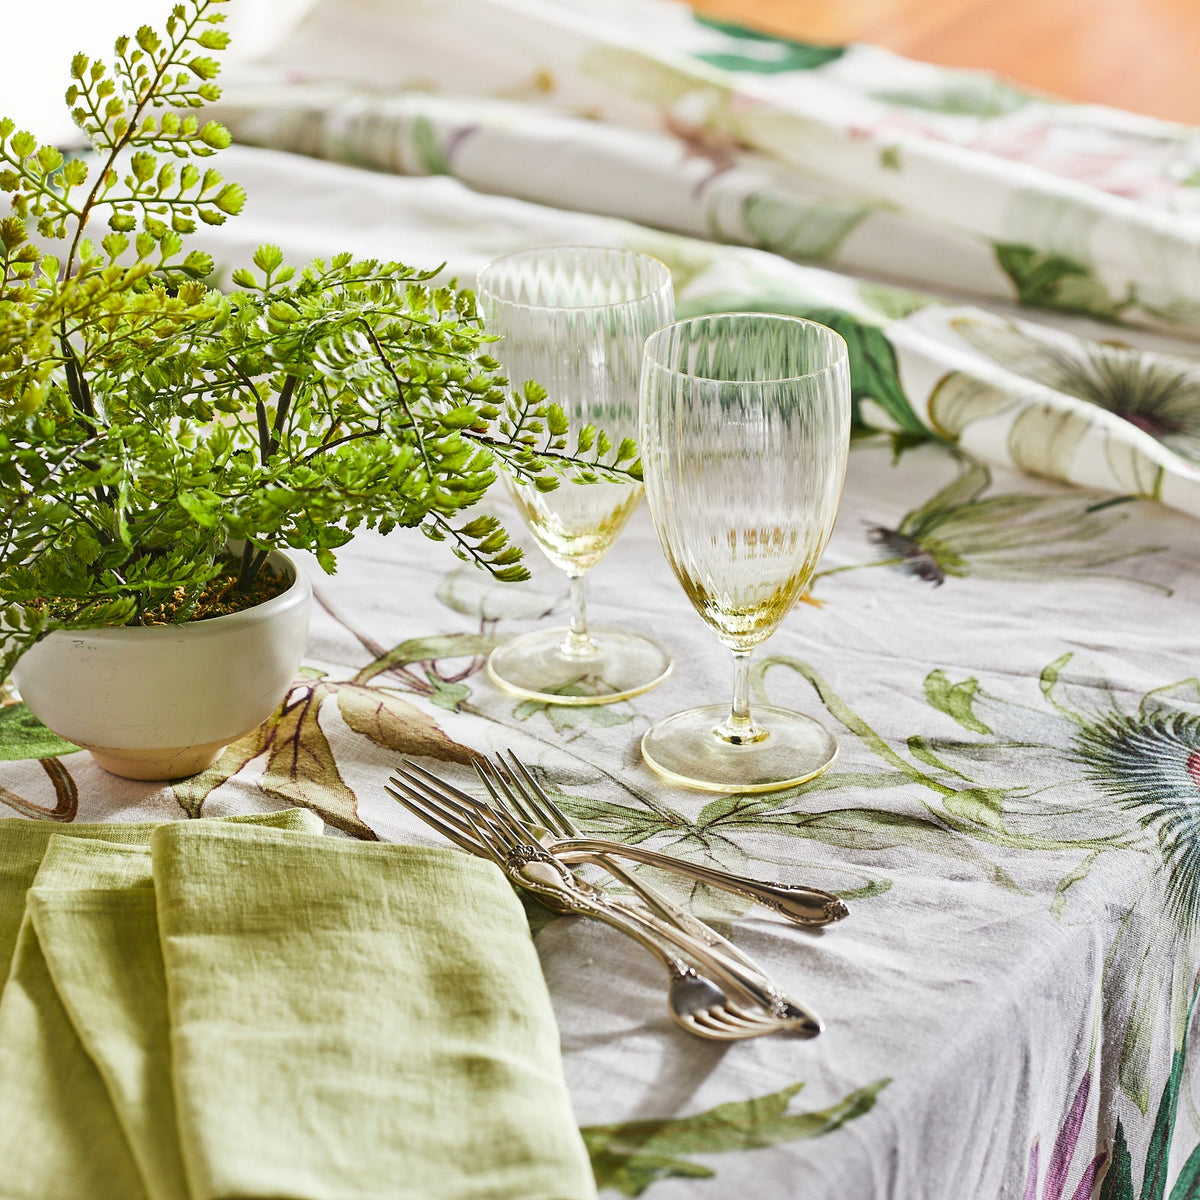 A Passionflower Linen Tablecloth with a plant on it by TTT.